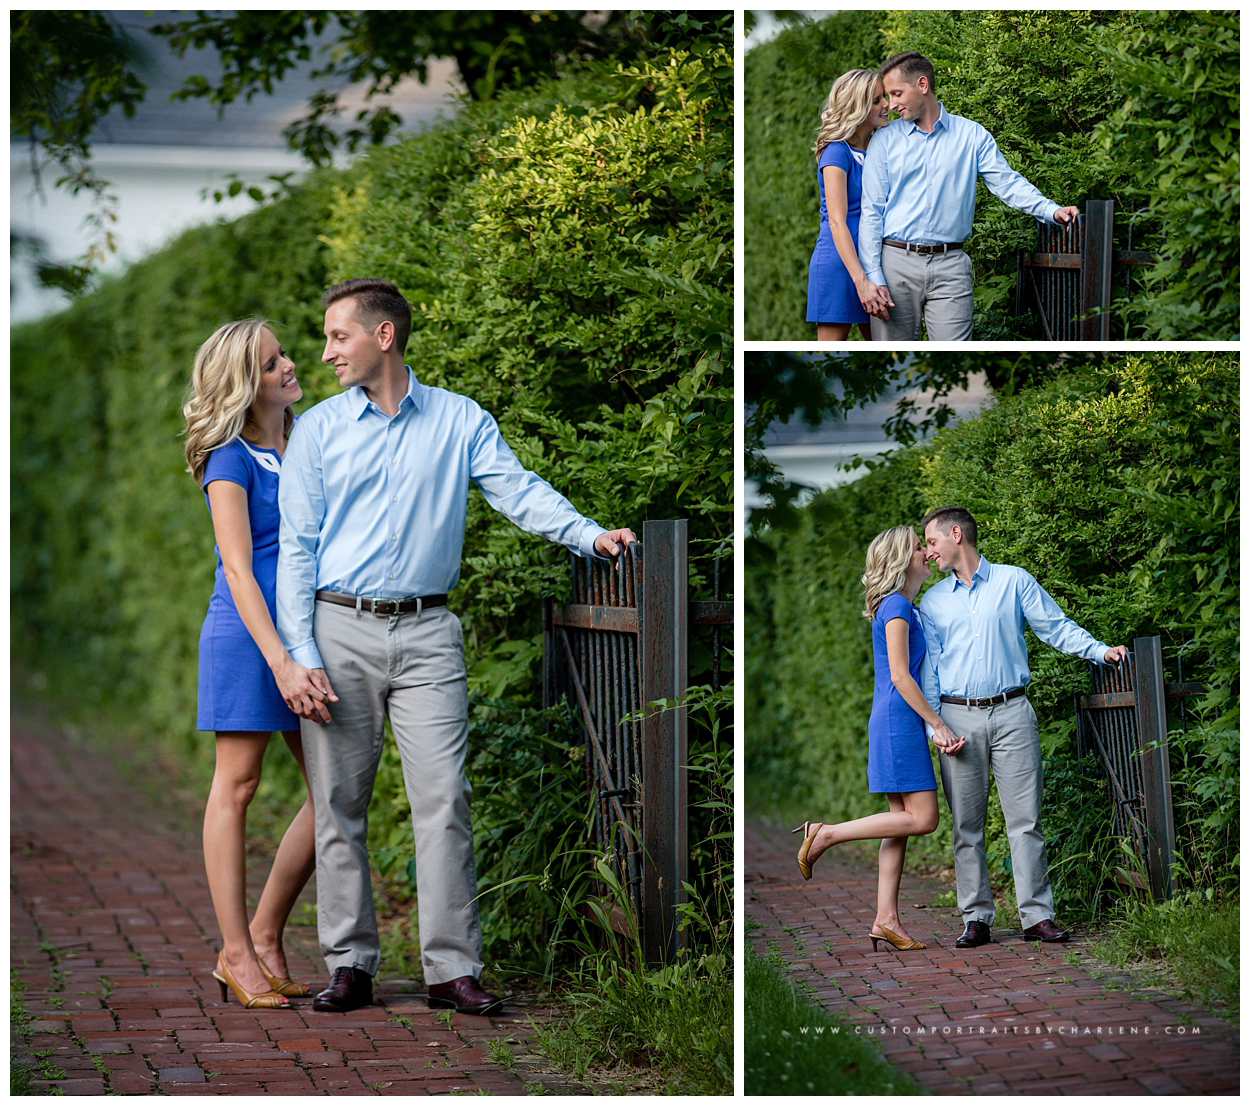 Sewickley Engagement Session - Engagement Picture Ideas - Pittsburgh Wedding Photography - Urban Rural Park Engaged8